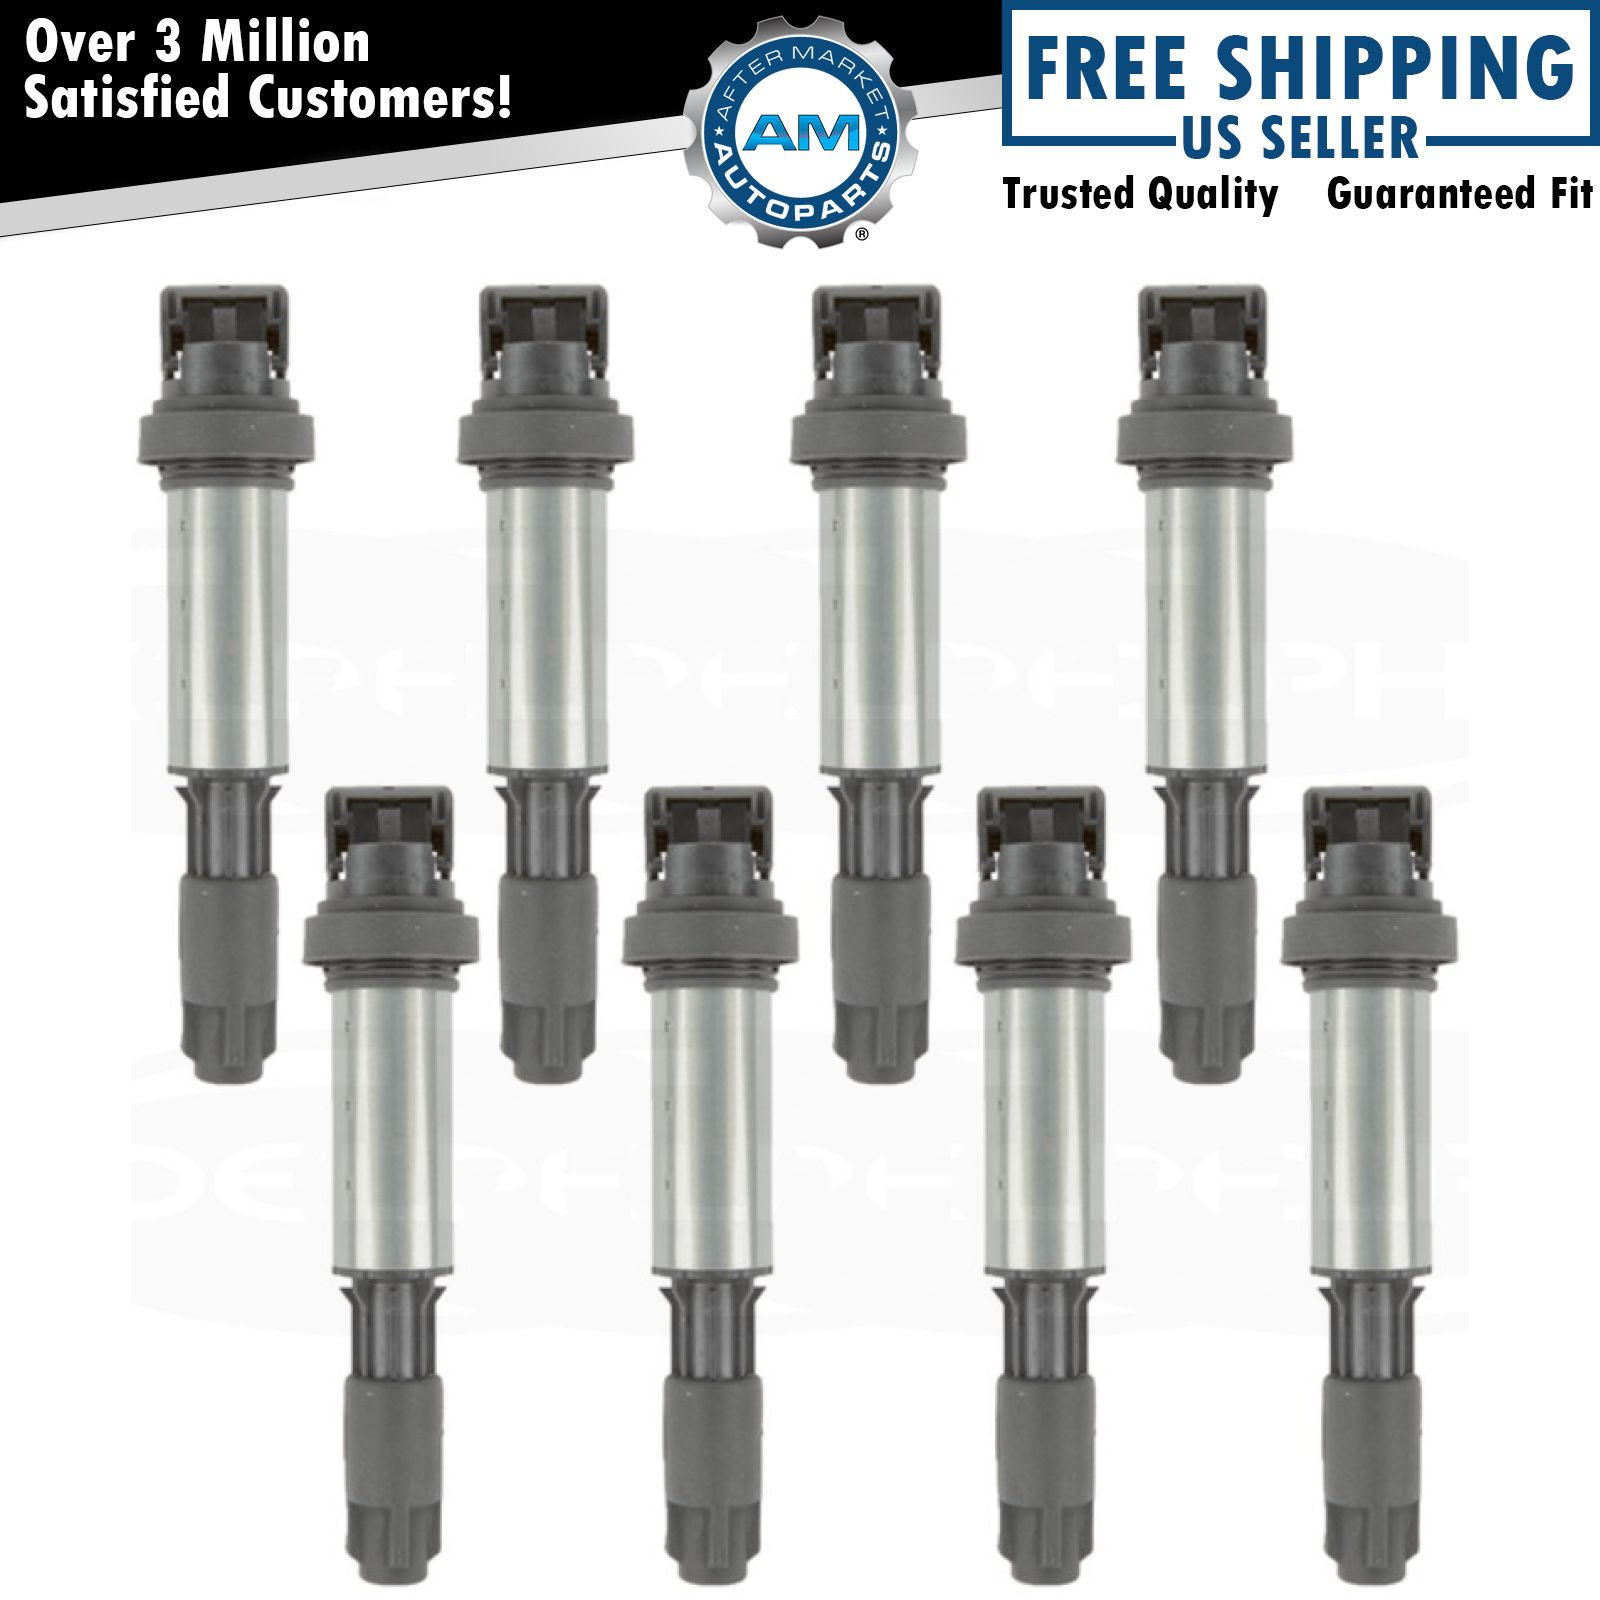 Delphi GN10328 Ignition Coil Set of 8 for BMW 325 530 545 M3 M5 1 Series New